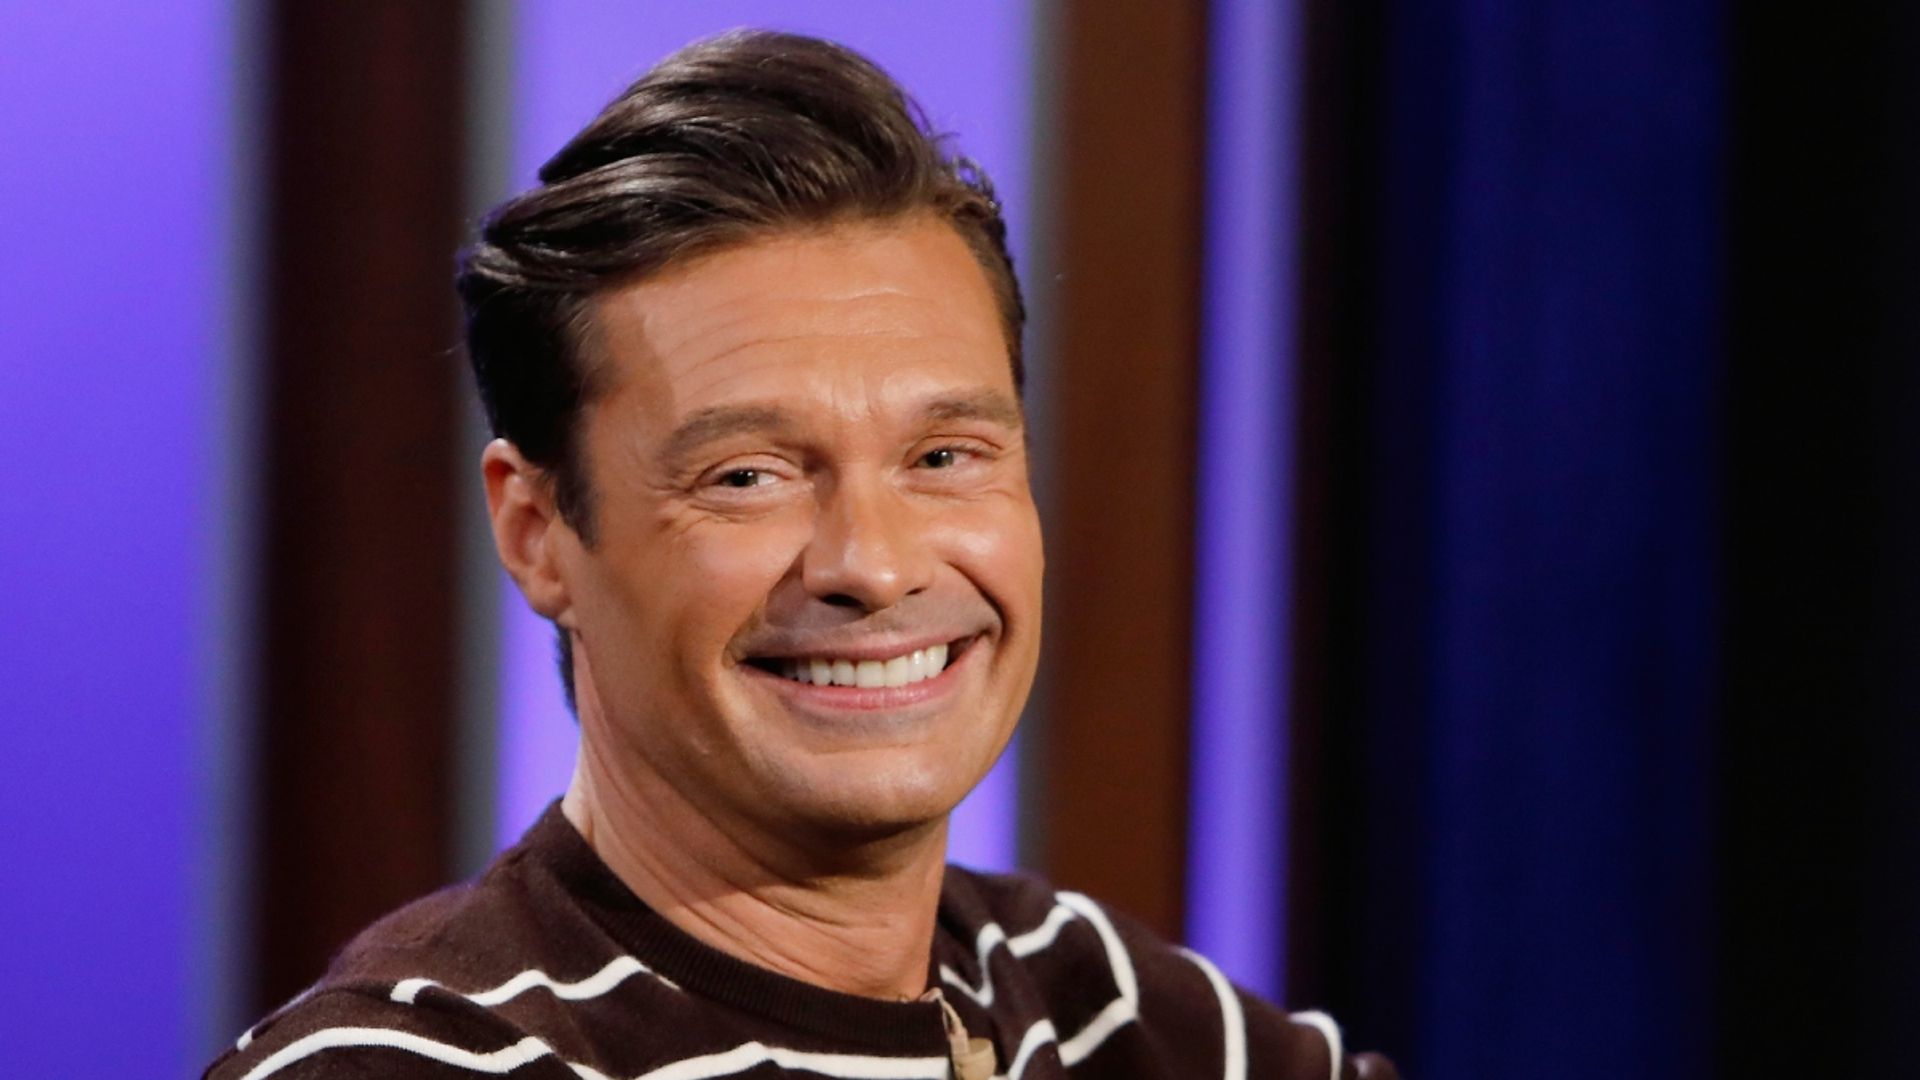 Ryan Seacrest's latest fashion choice on LIVE! leaves fans divided